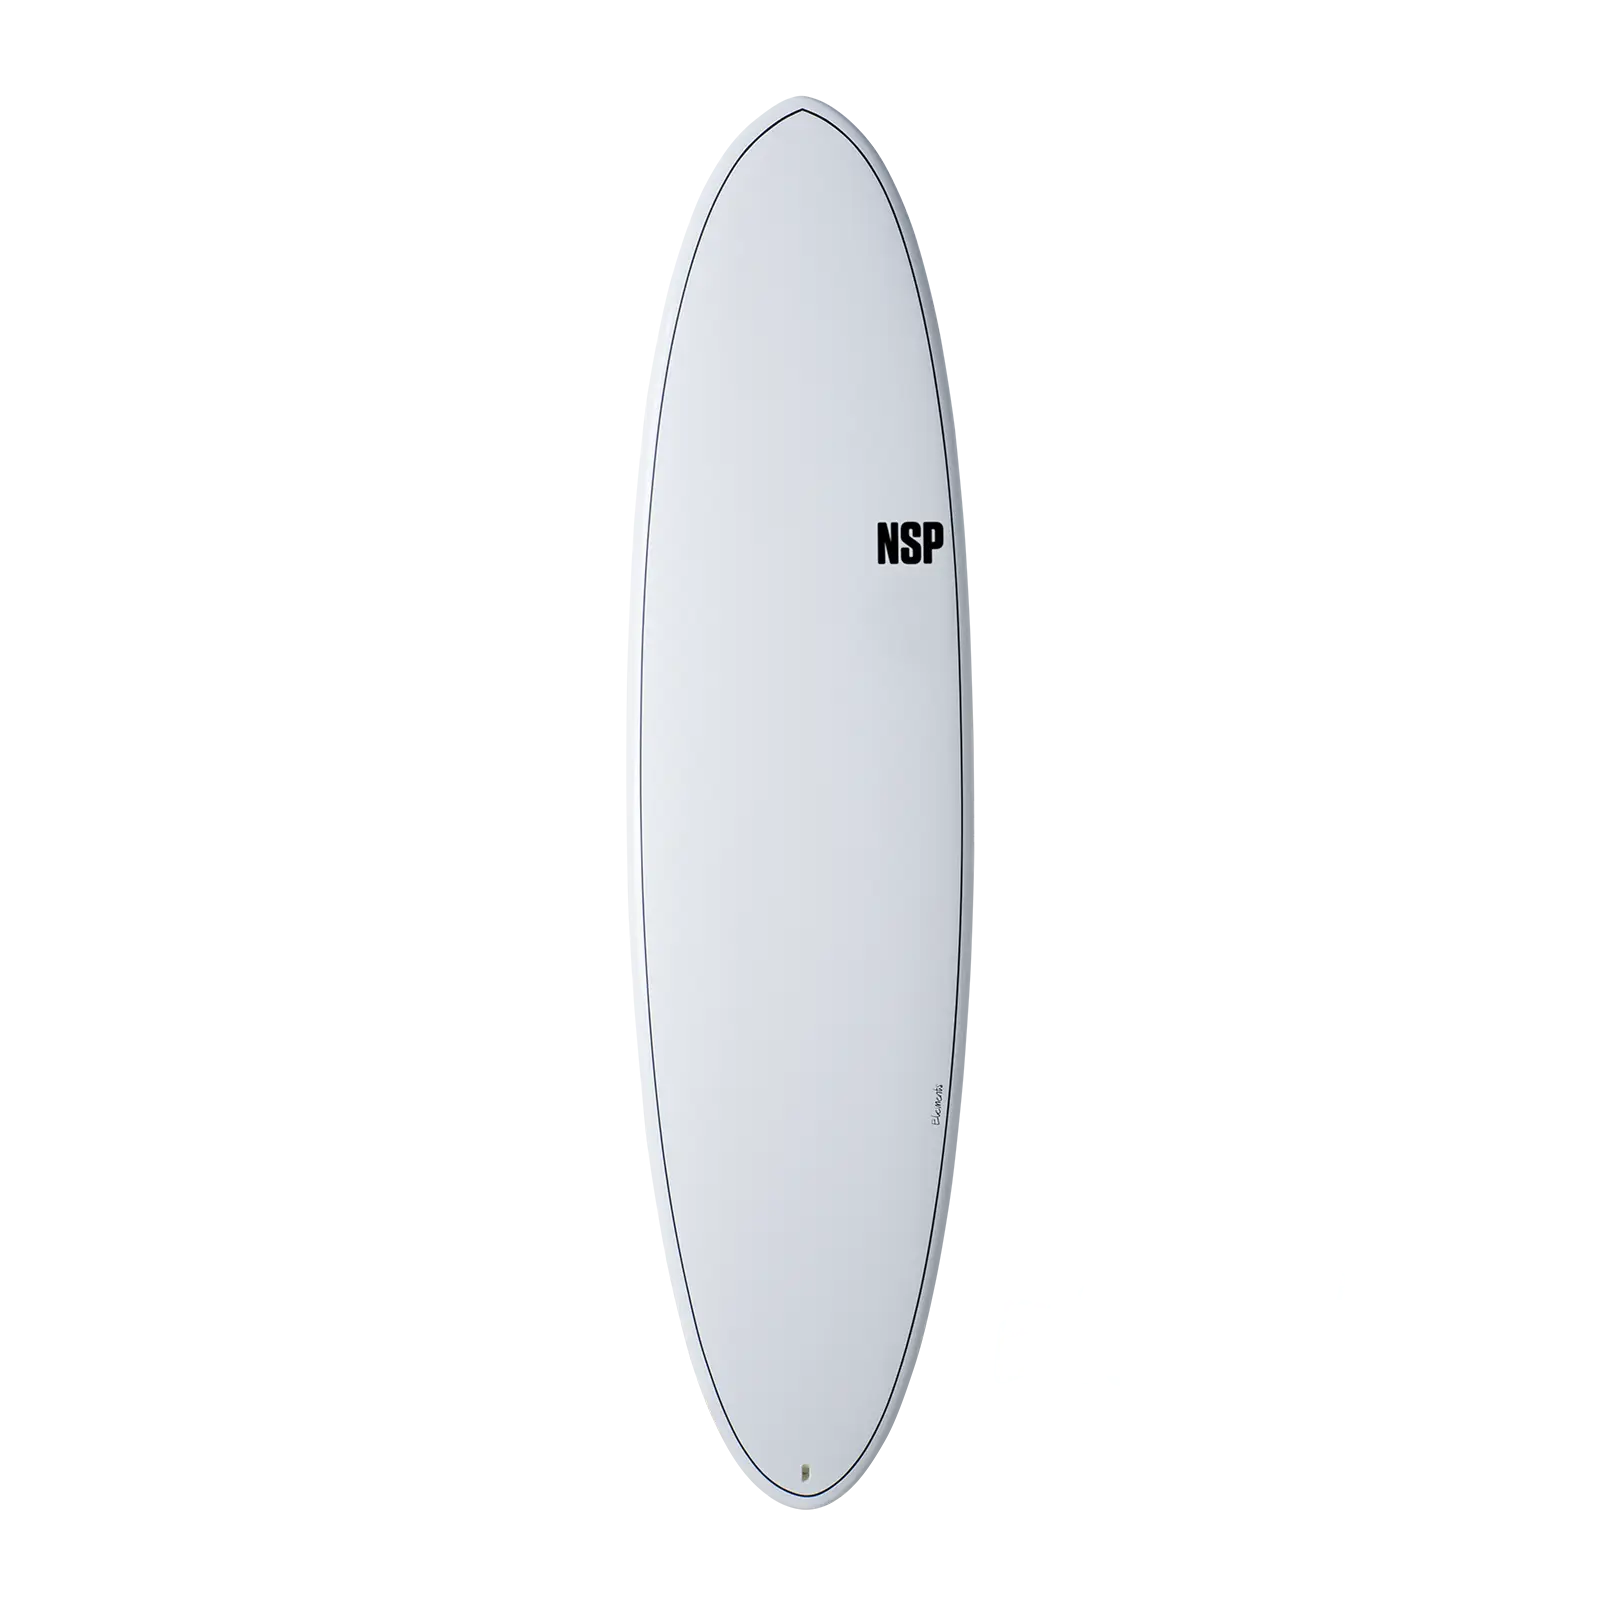 Funboard Surfboards NSP Elements White